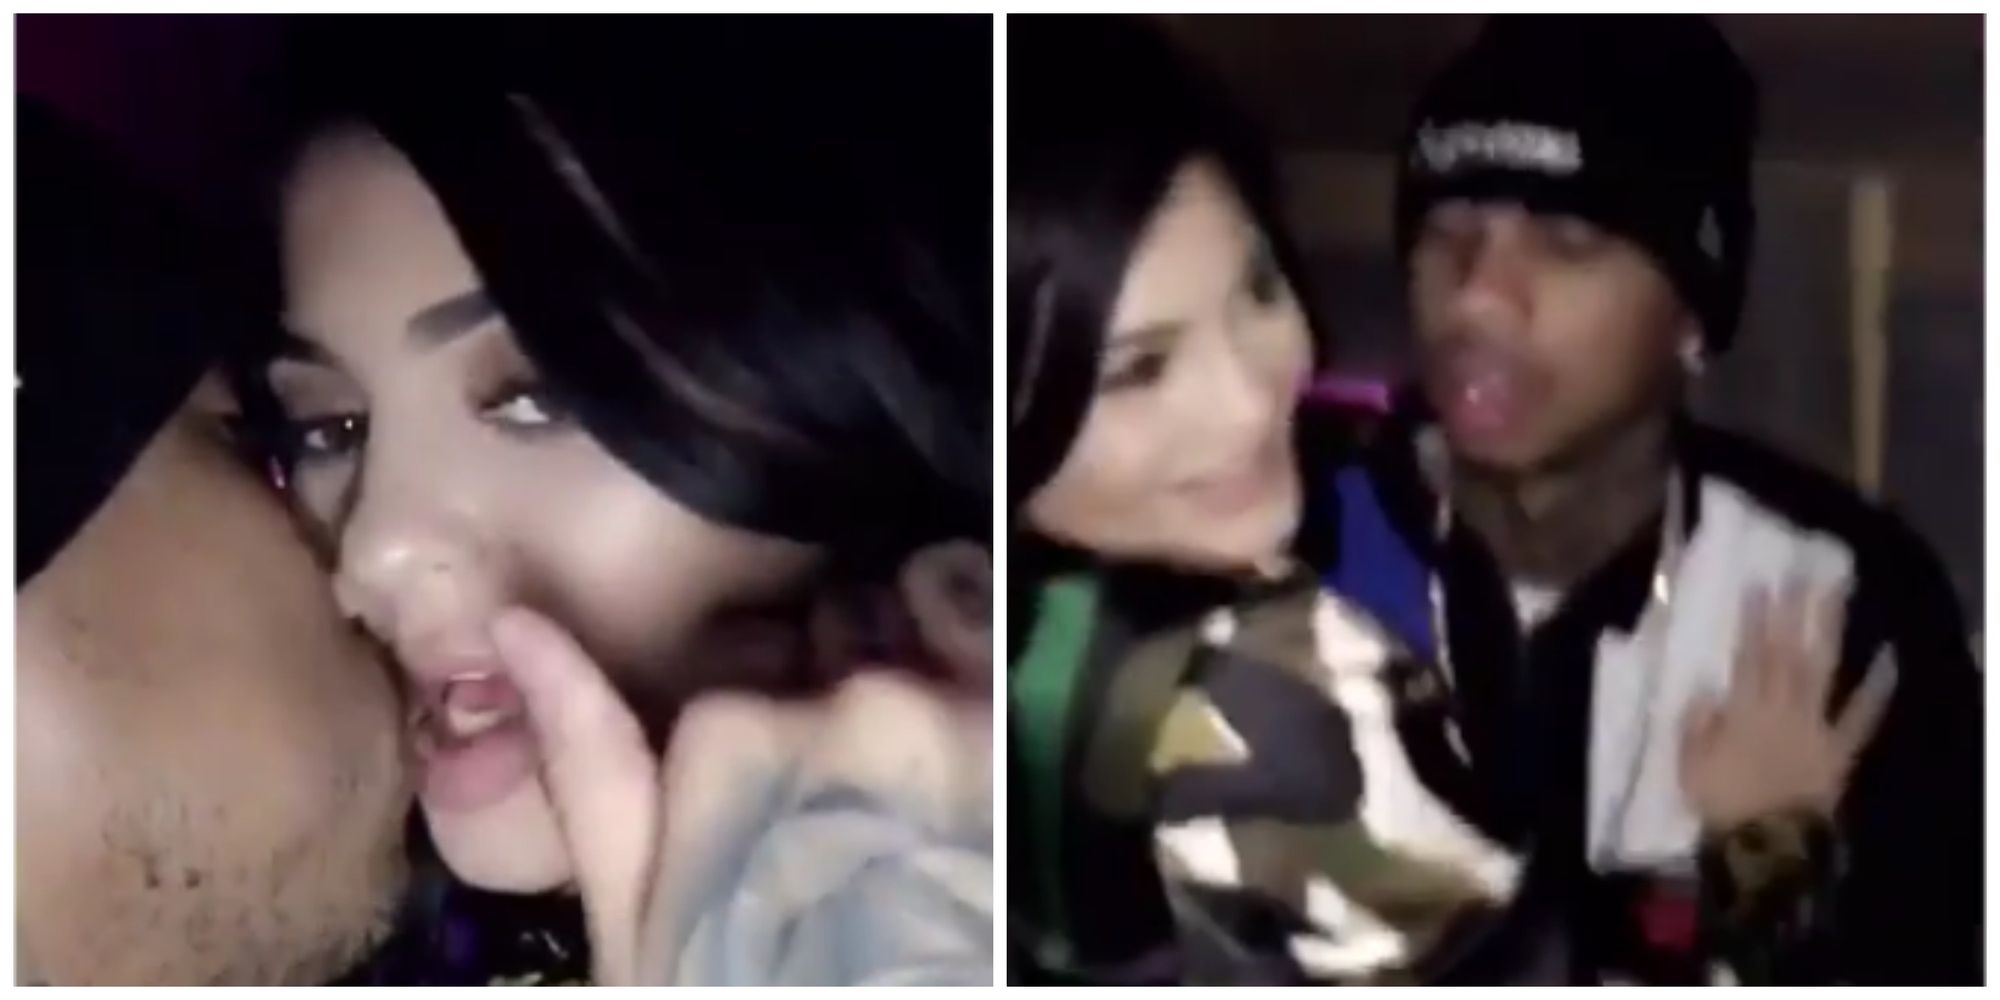 VIDEO: Kylie Jenner &#038; Tyga Make Out On Snapchat!